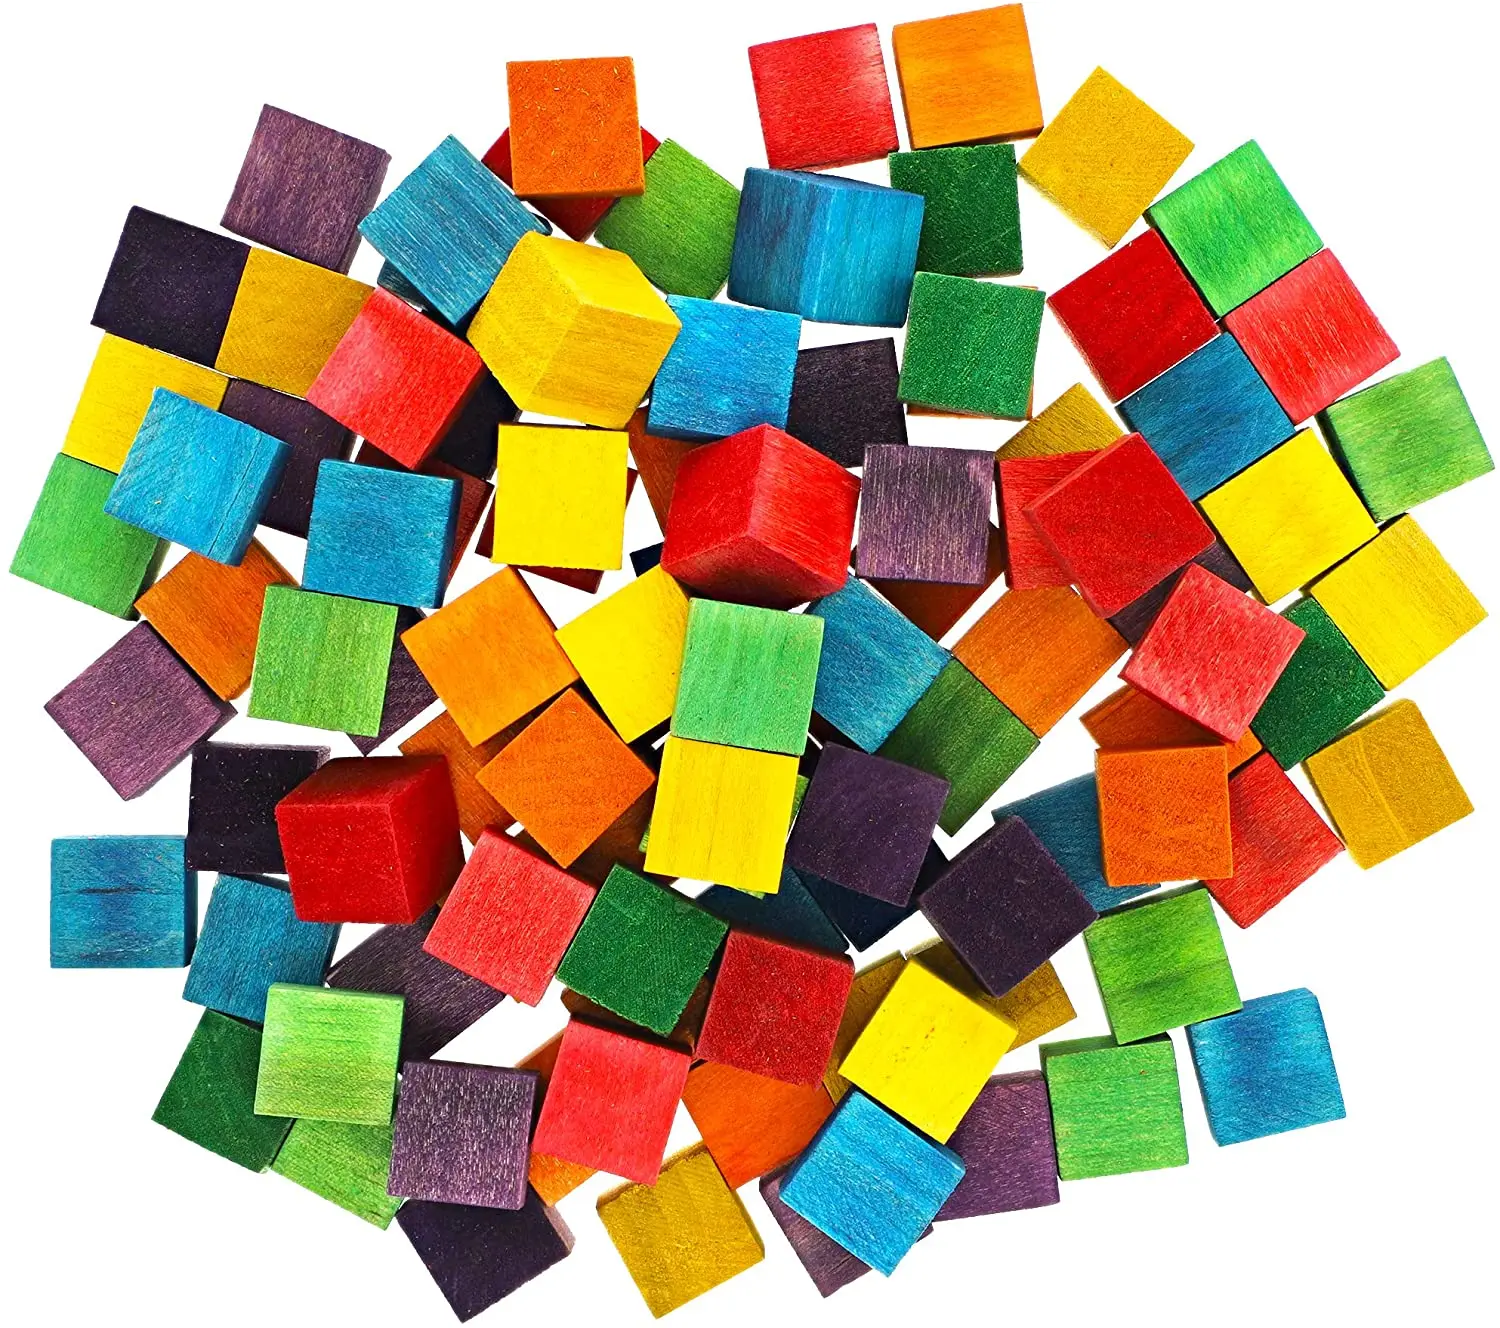  Bright Creations 100 Piece Wooden Blocks for Crafts, Colorful  Small Cubes (6 Colors, 0.6 in) : Toys & Games